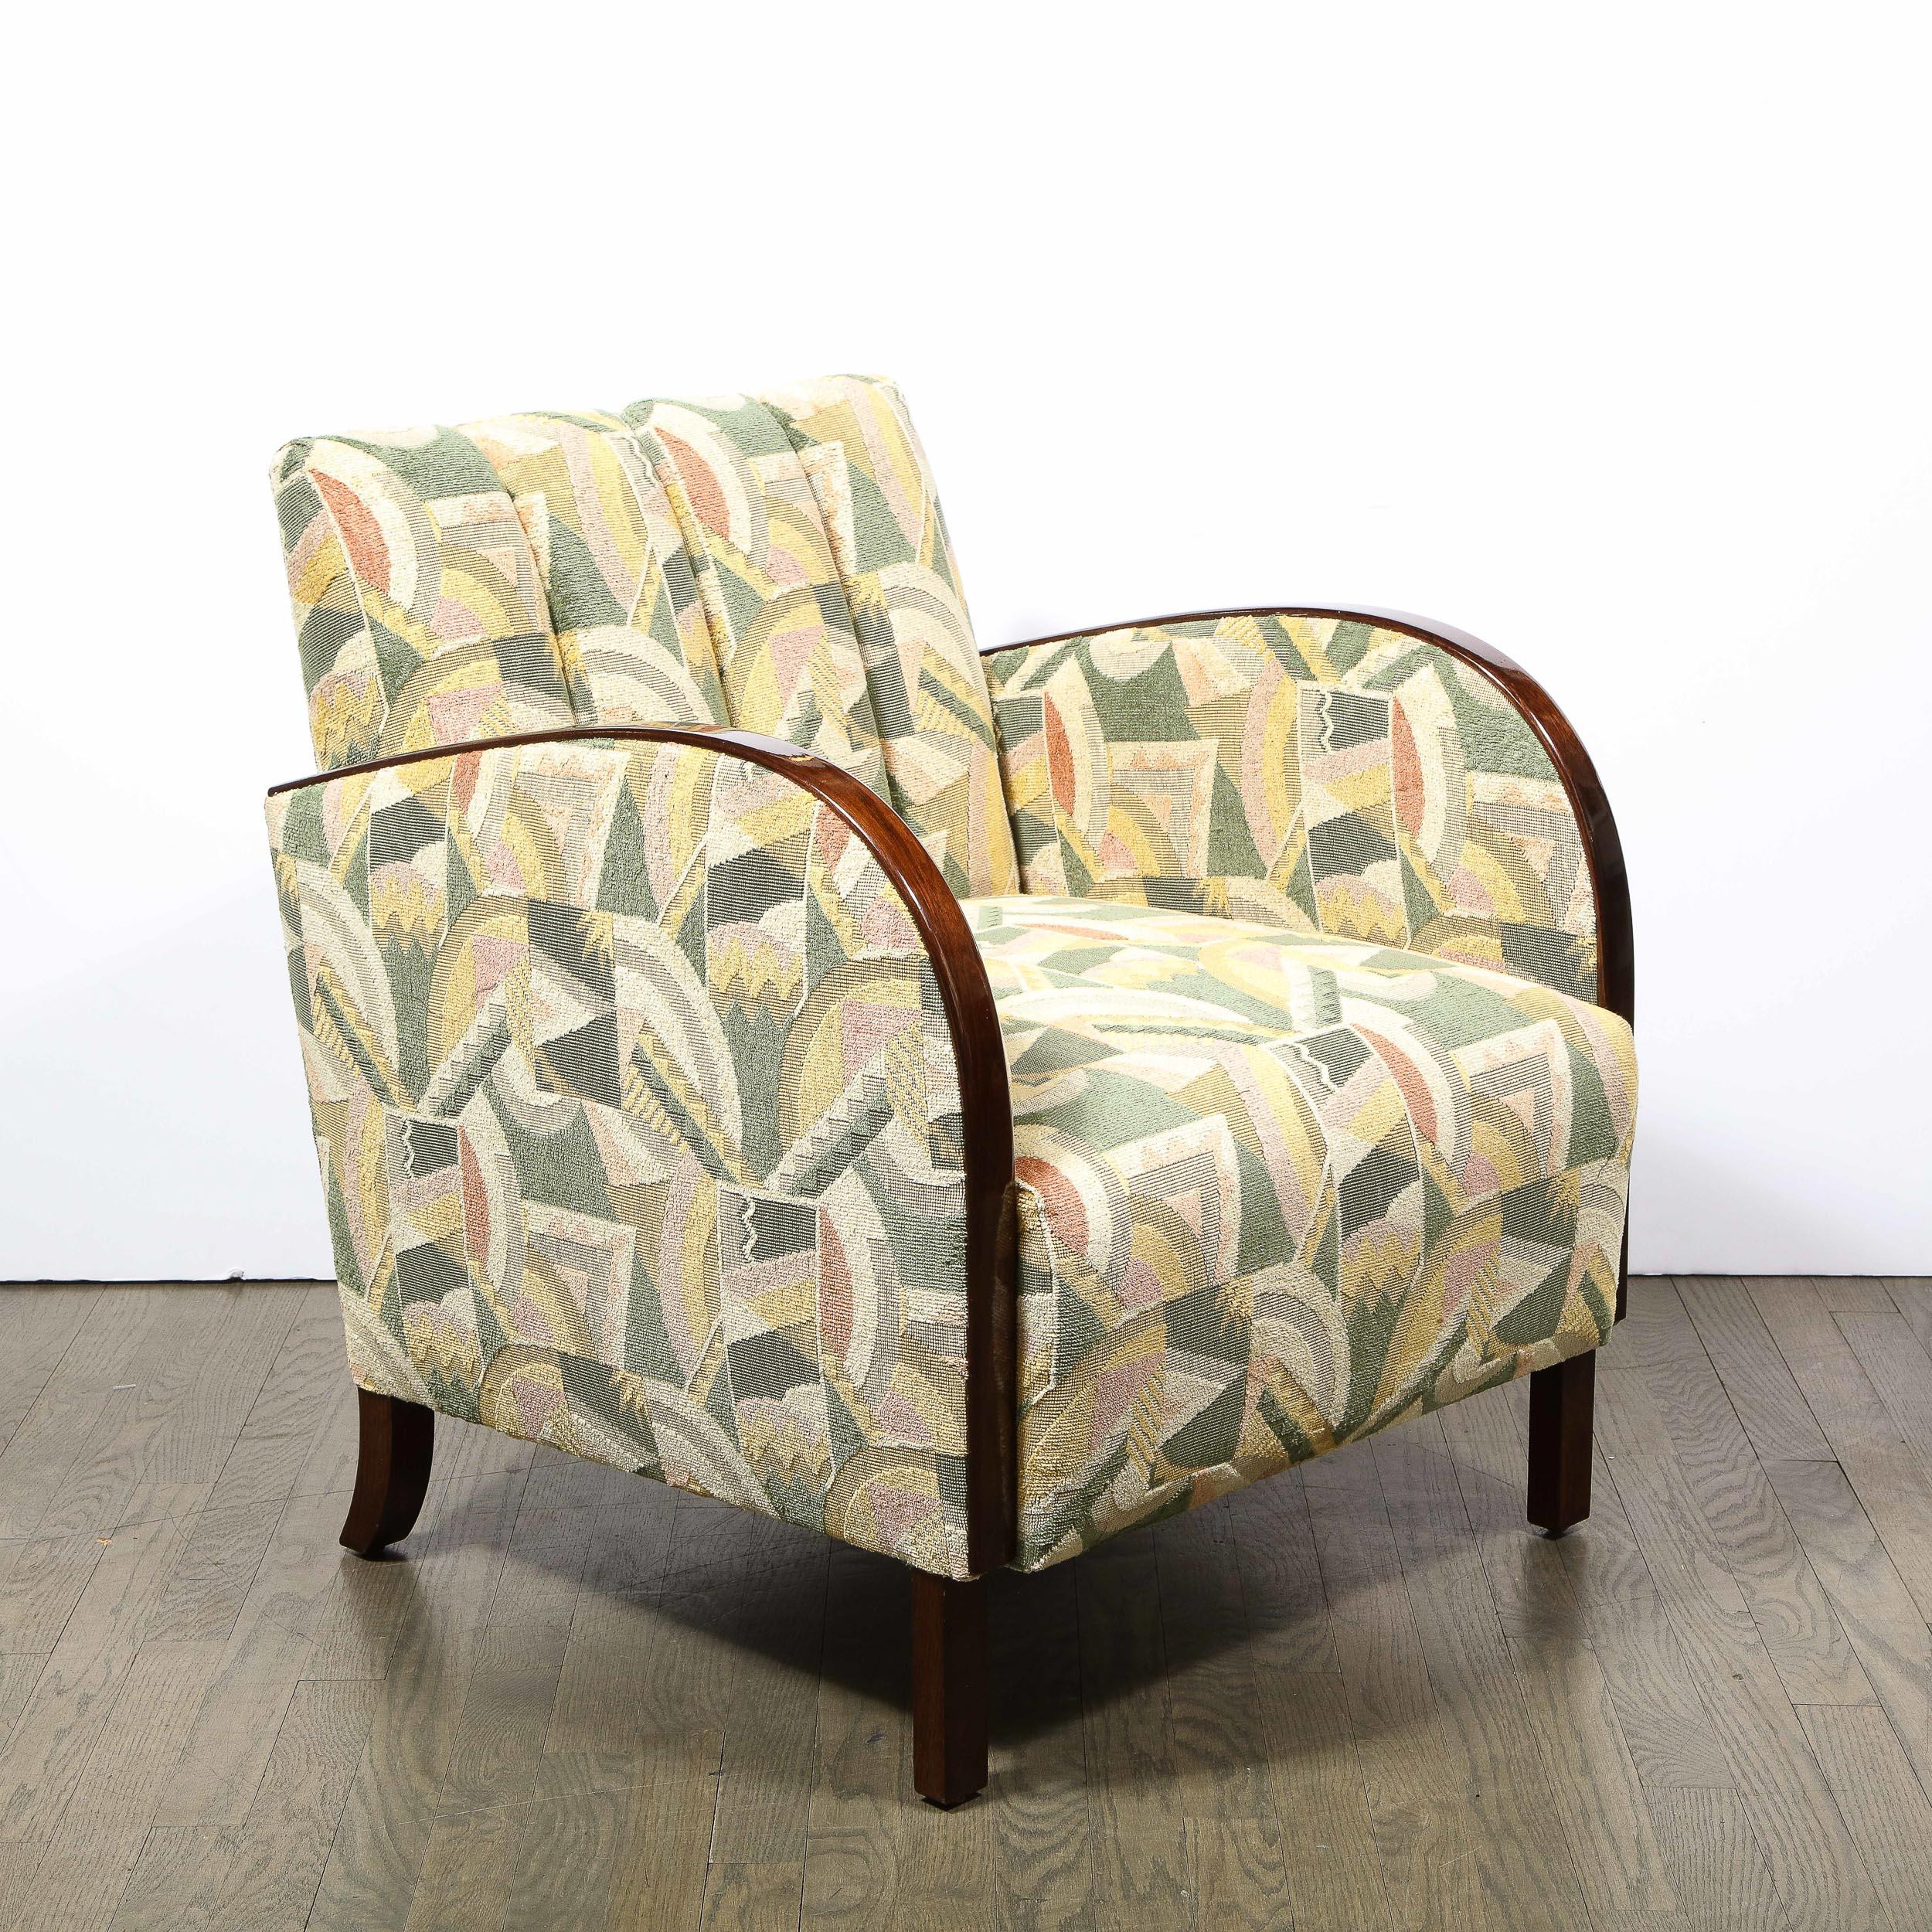 Pair of Art Deco Streamlined Walnut Club Chairs in Cubist Clarence House Fabric For Sale 6